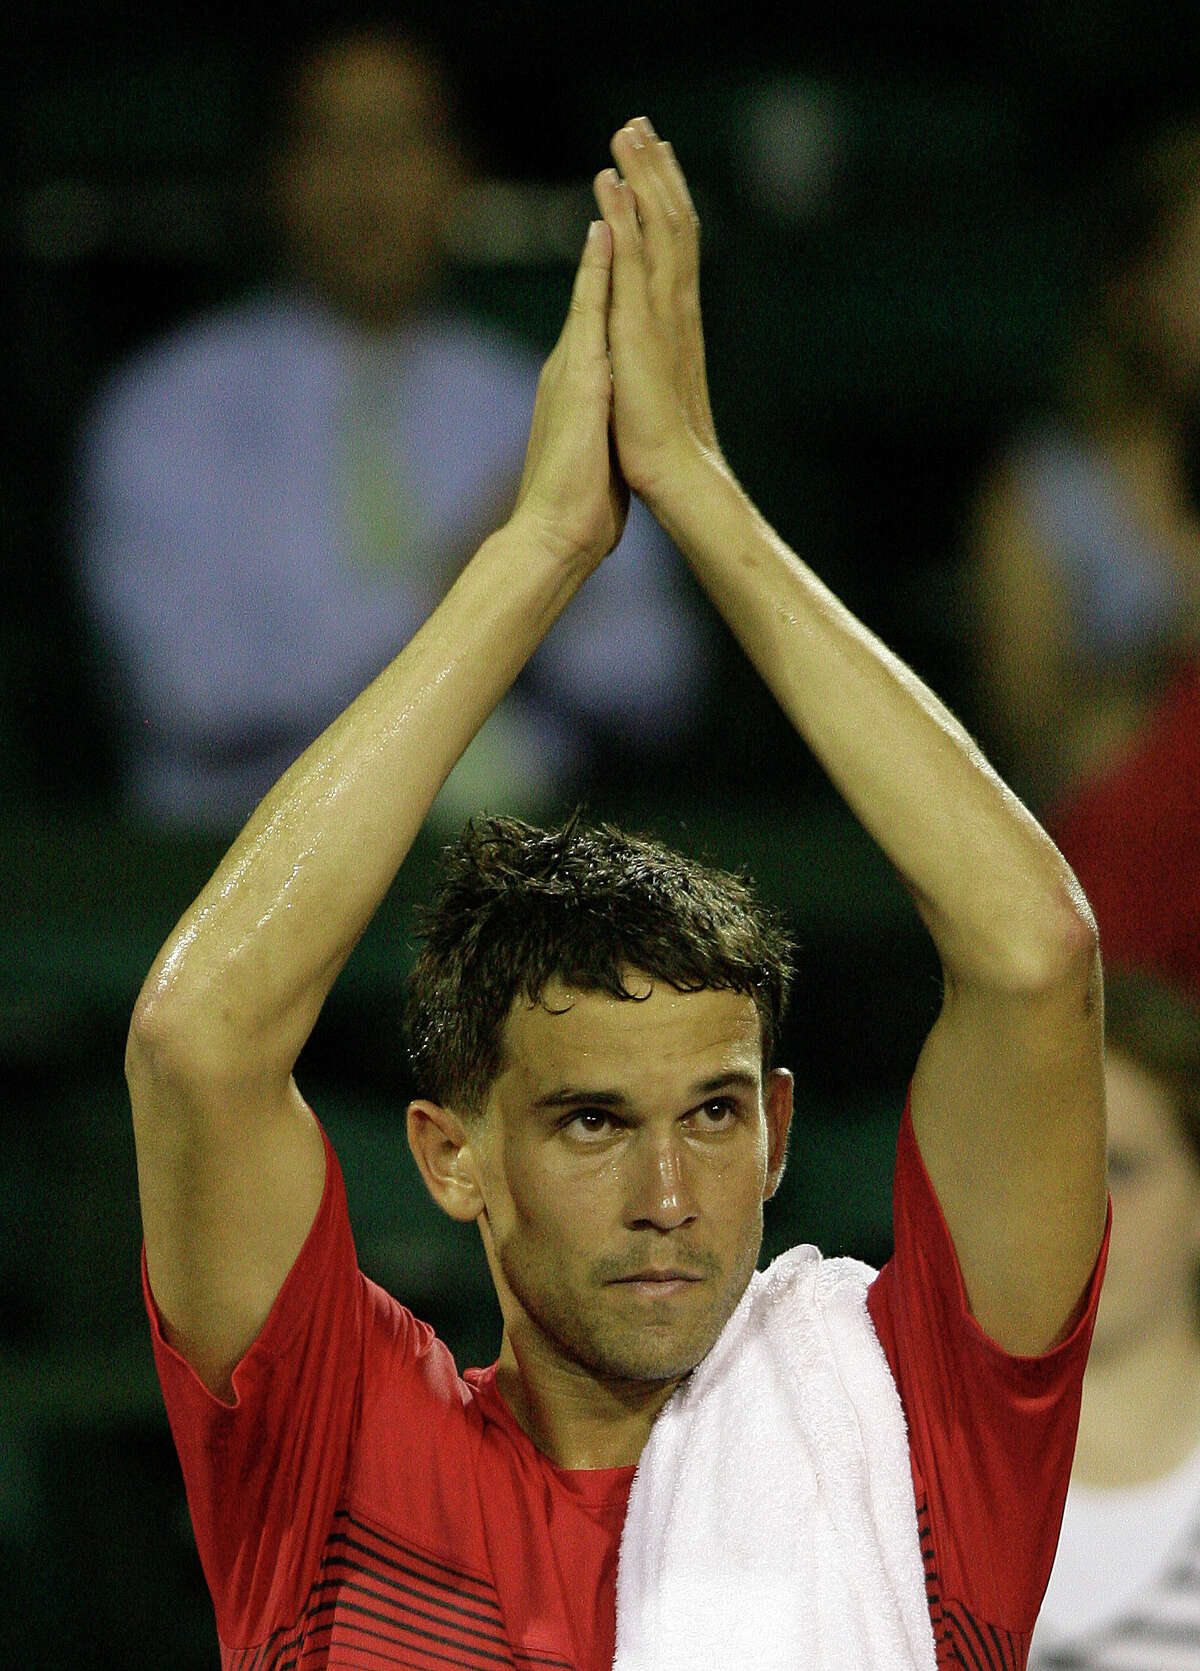 Ryan Sweeting reacts after defeating Ricardo Mello during a singles match at River Oaks Country Club Tuesday, April 10, 2012, in Houston. Sweeting won 6-3, 7-6 (6).